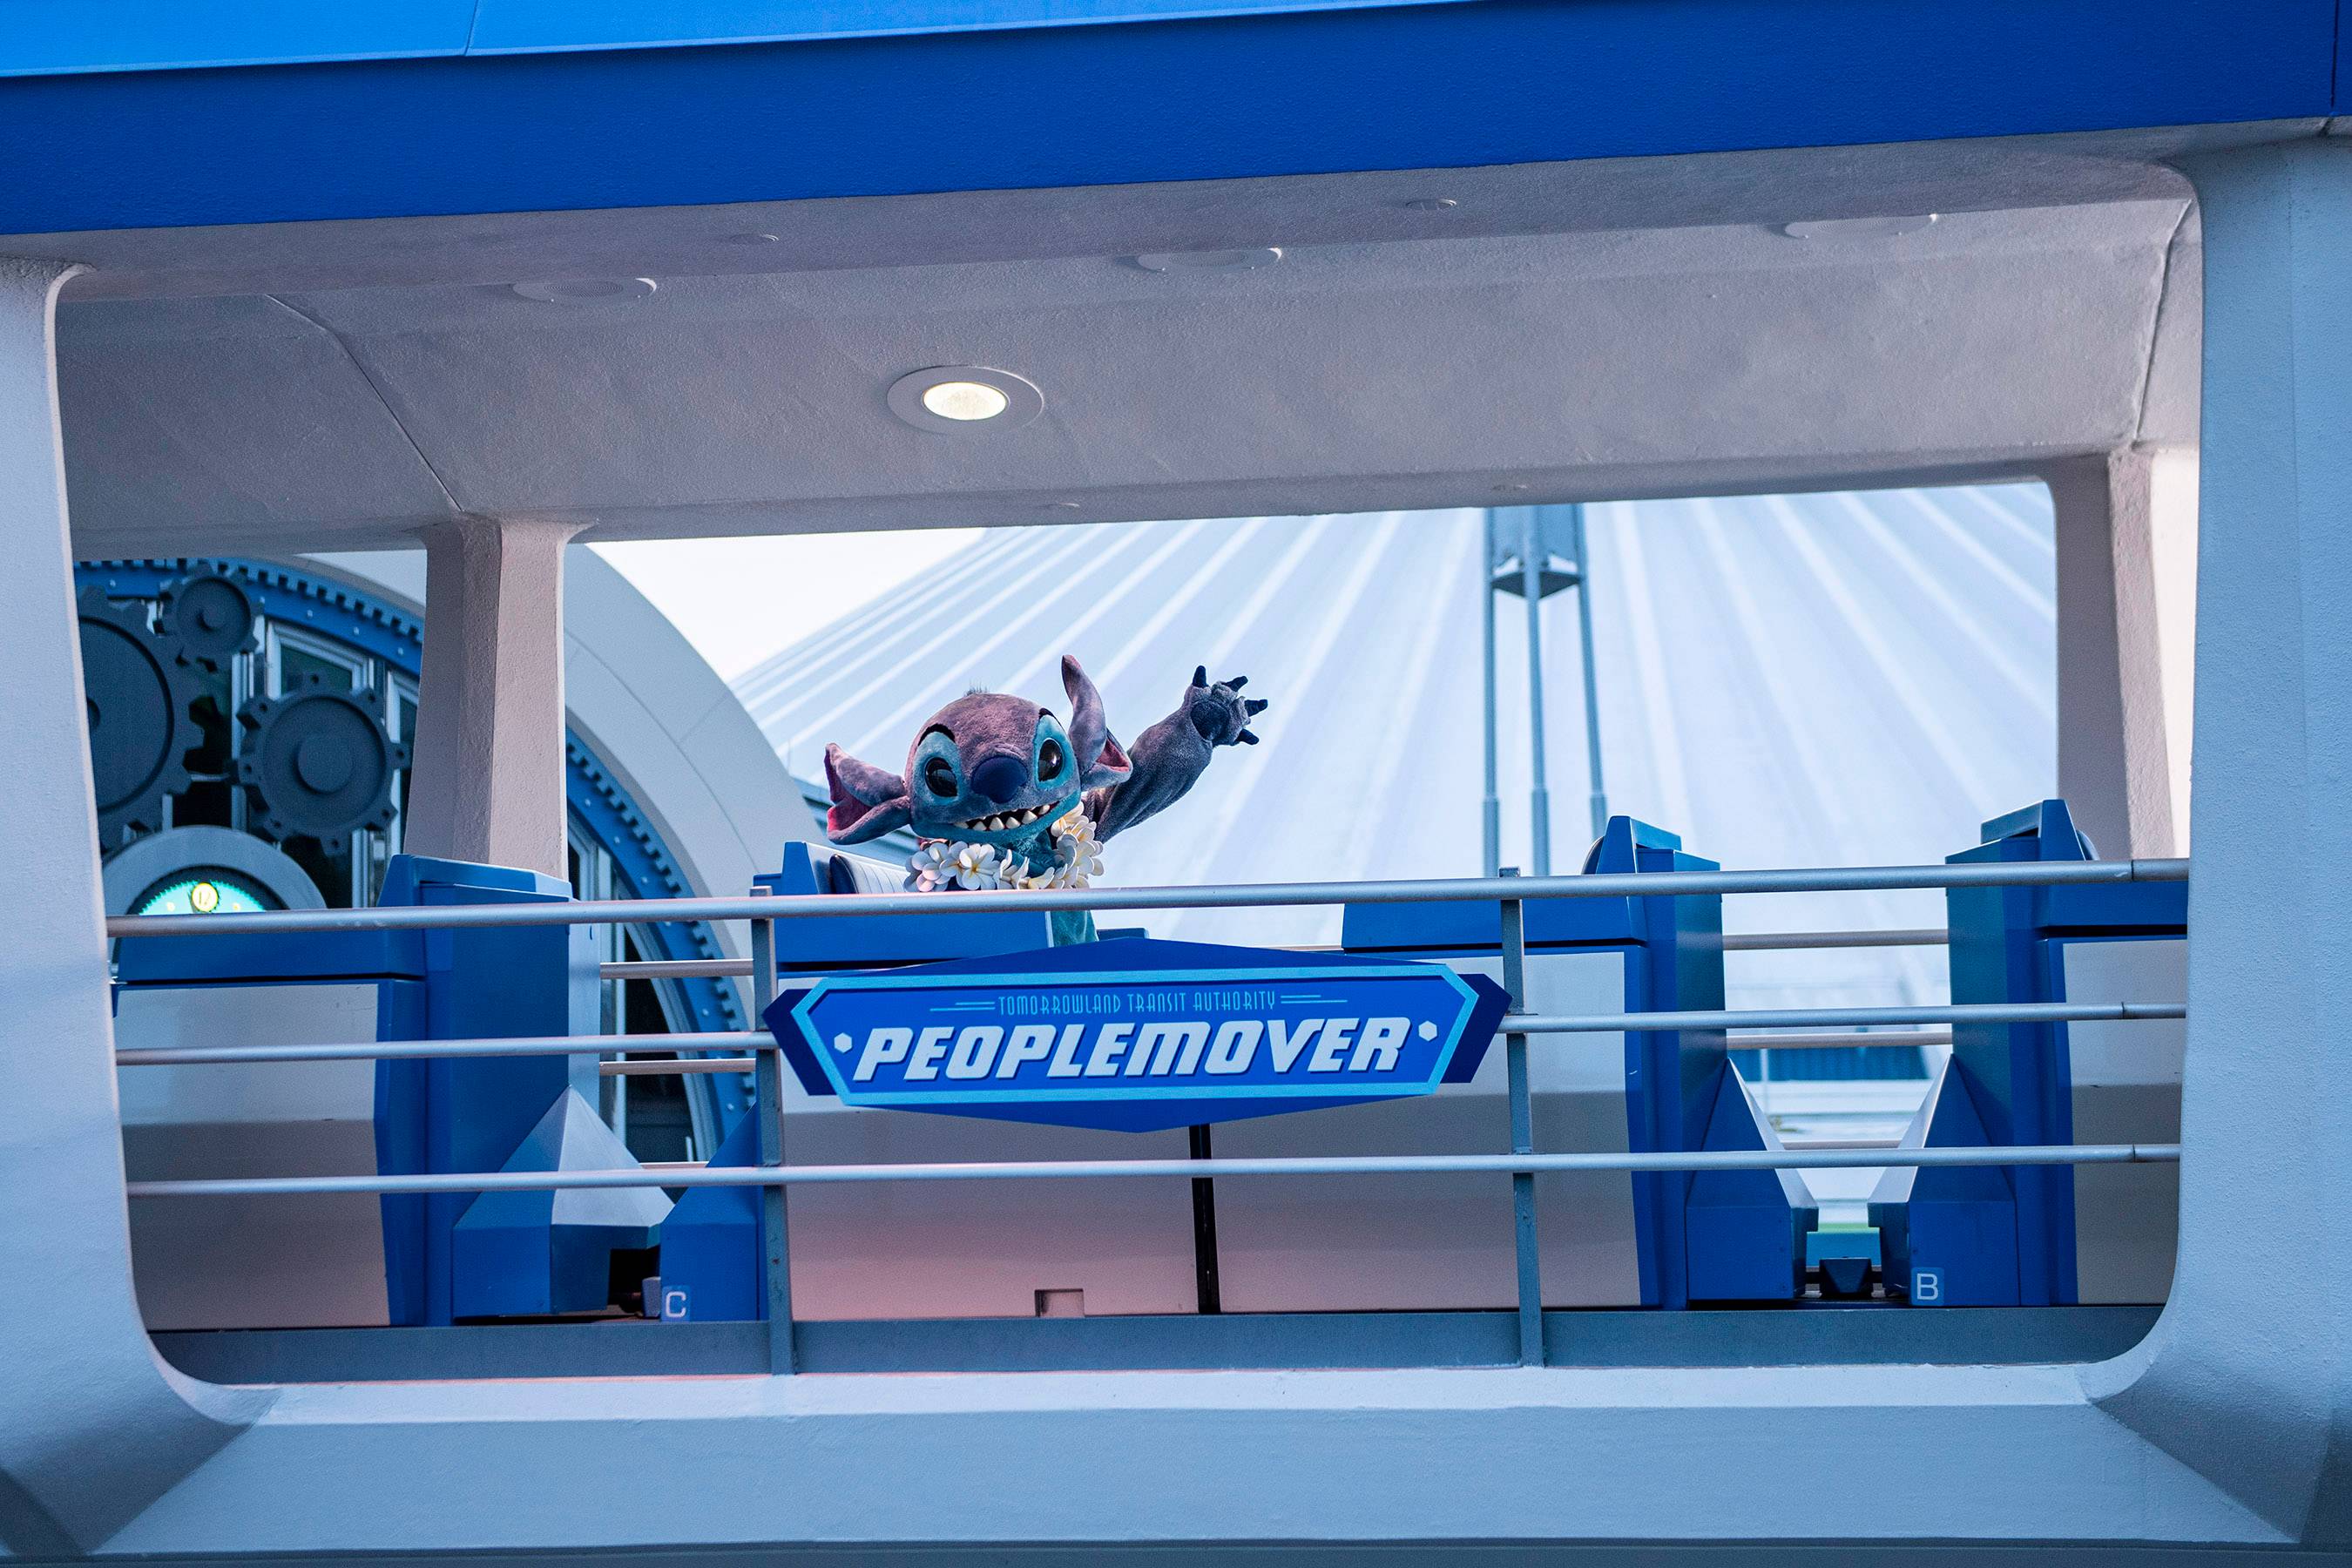 Tomorrowland Transit Authority PeopleMover reopens at Magic Kingdom